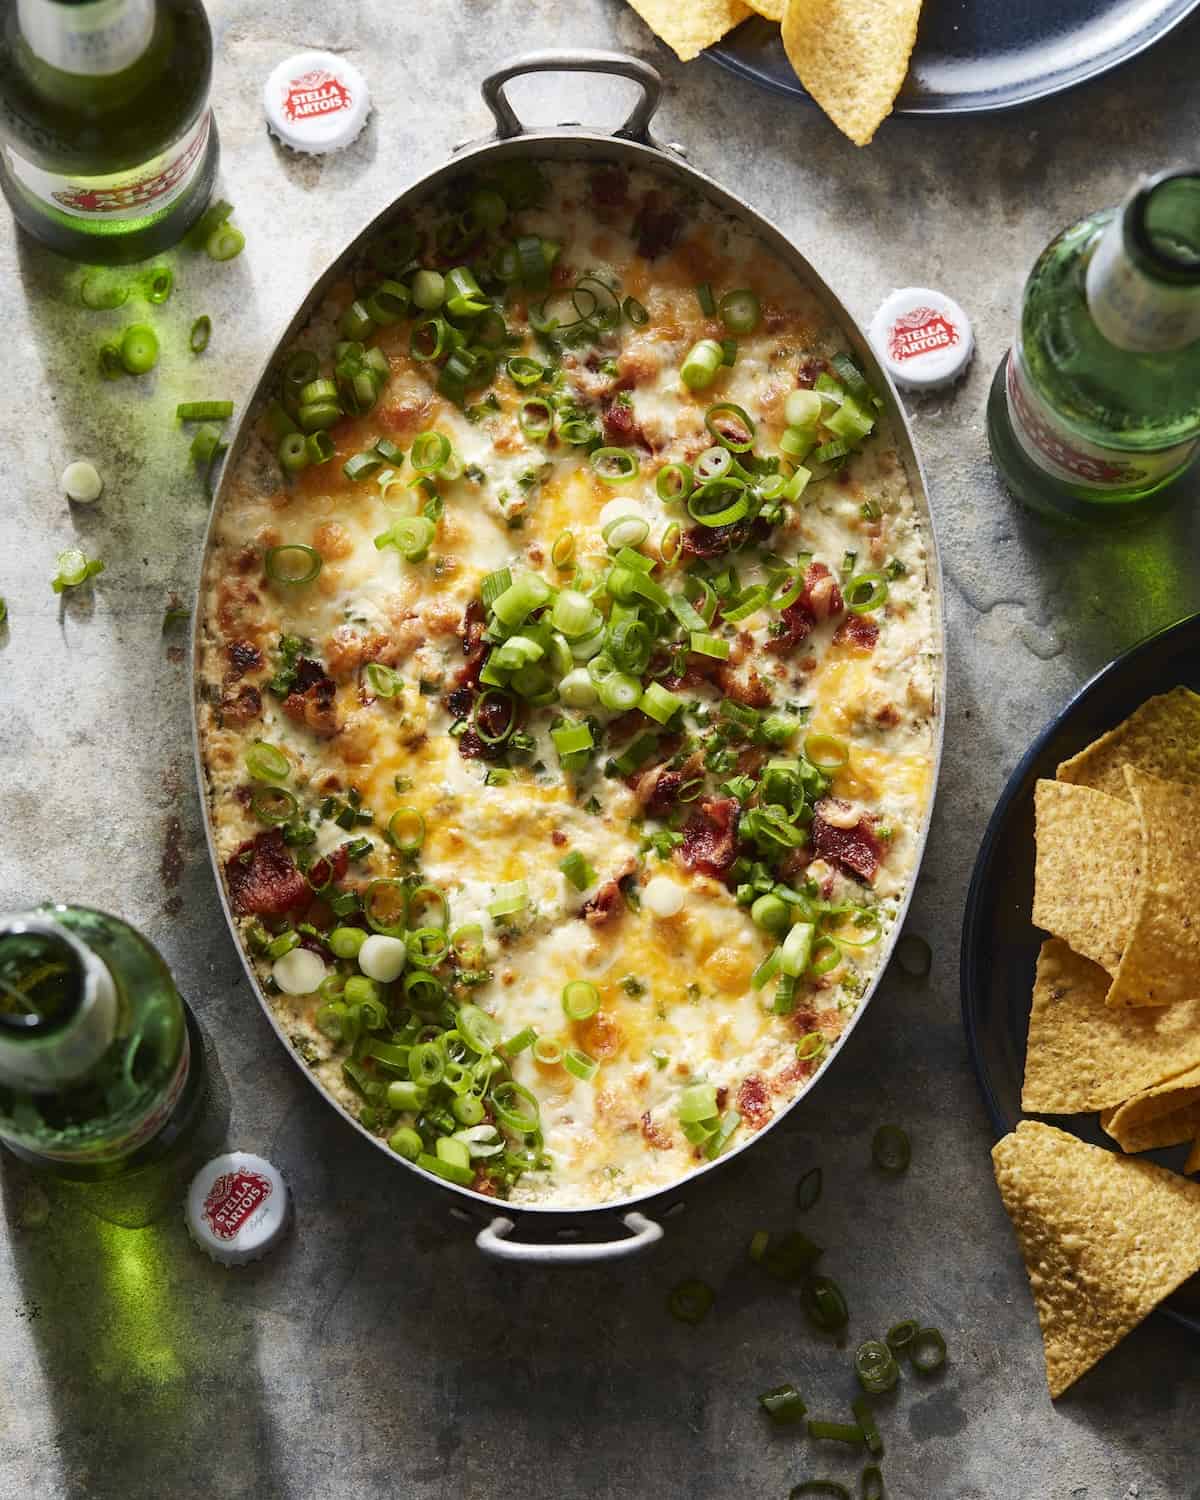 An overheat shot of jalapeño popper dip in a rectangular dish, with Stella Artois beer bottles and plates with tortilla chips on the side.